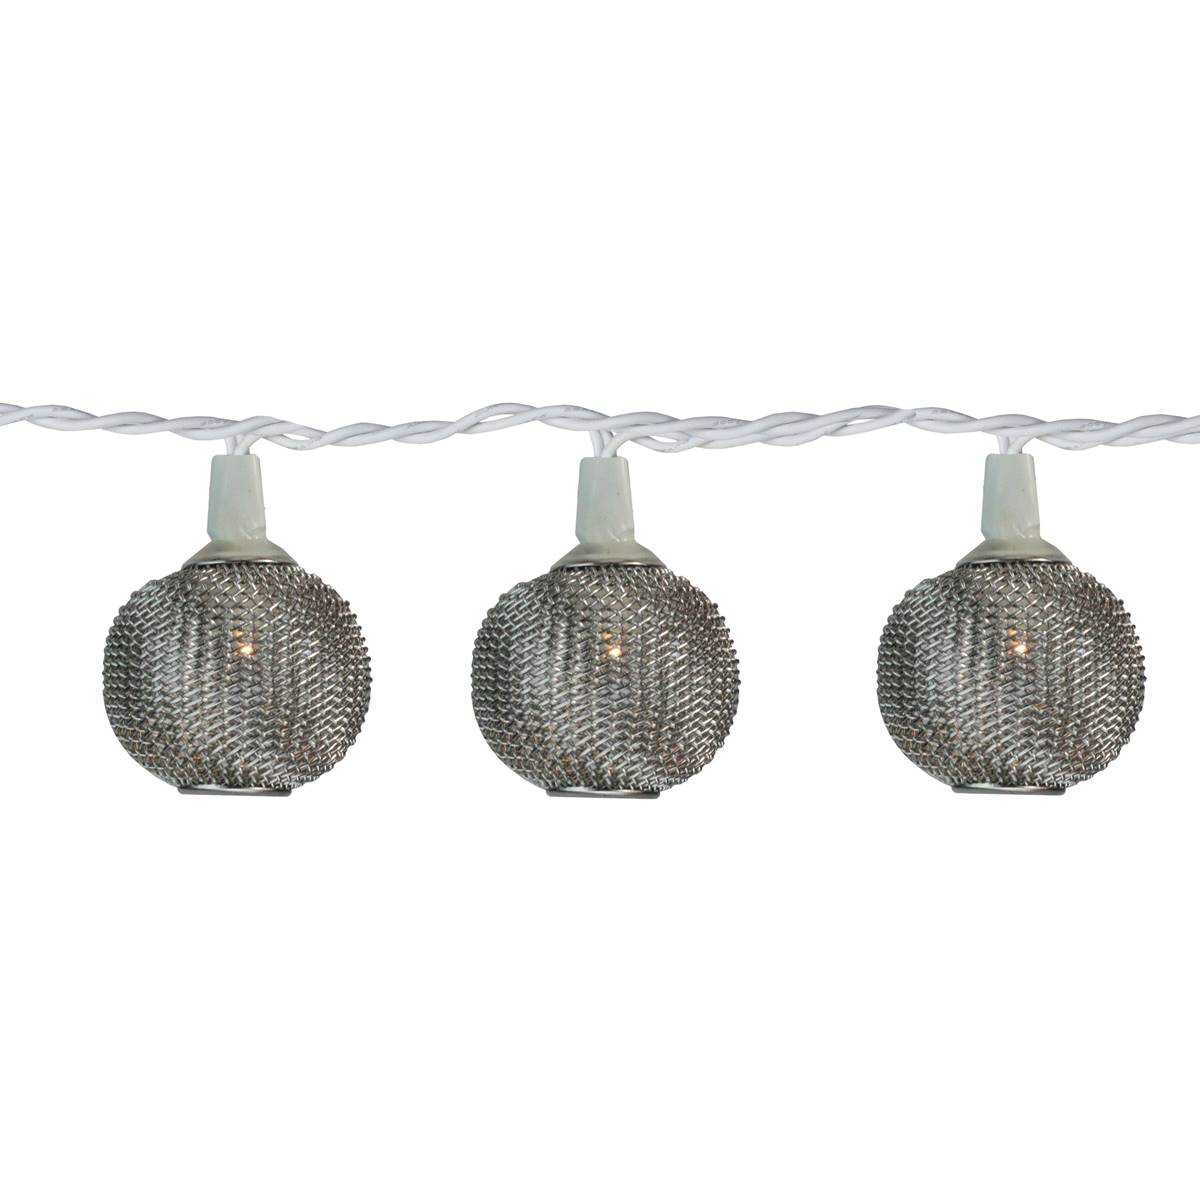 Sienna 10ct. Silver Wire Mesh Globe LED Garden Lights With Timer